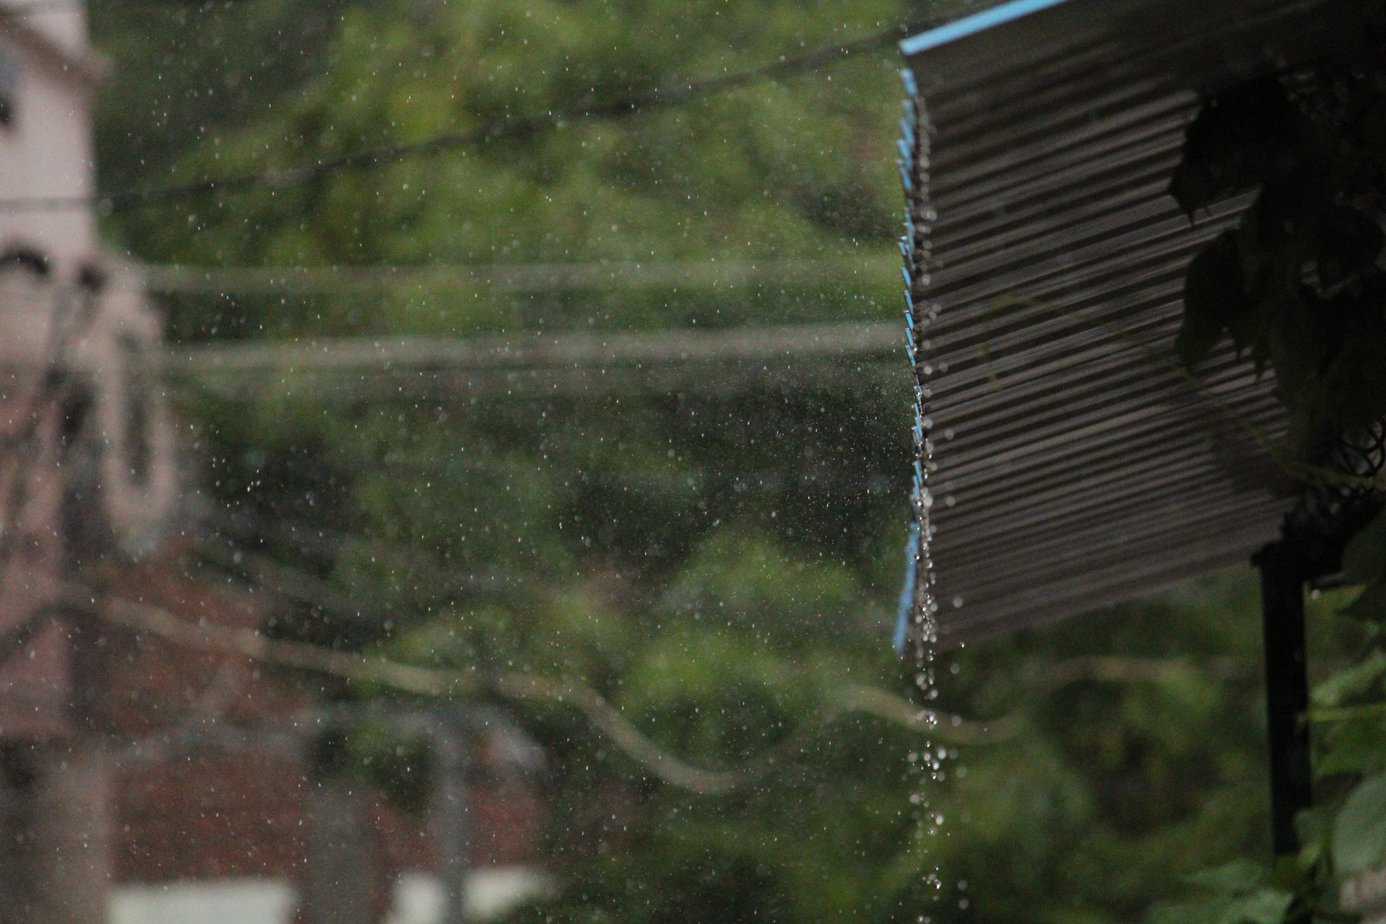 Rainwater falling from a shed.